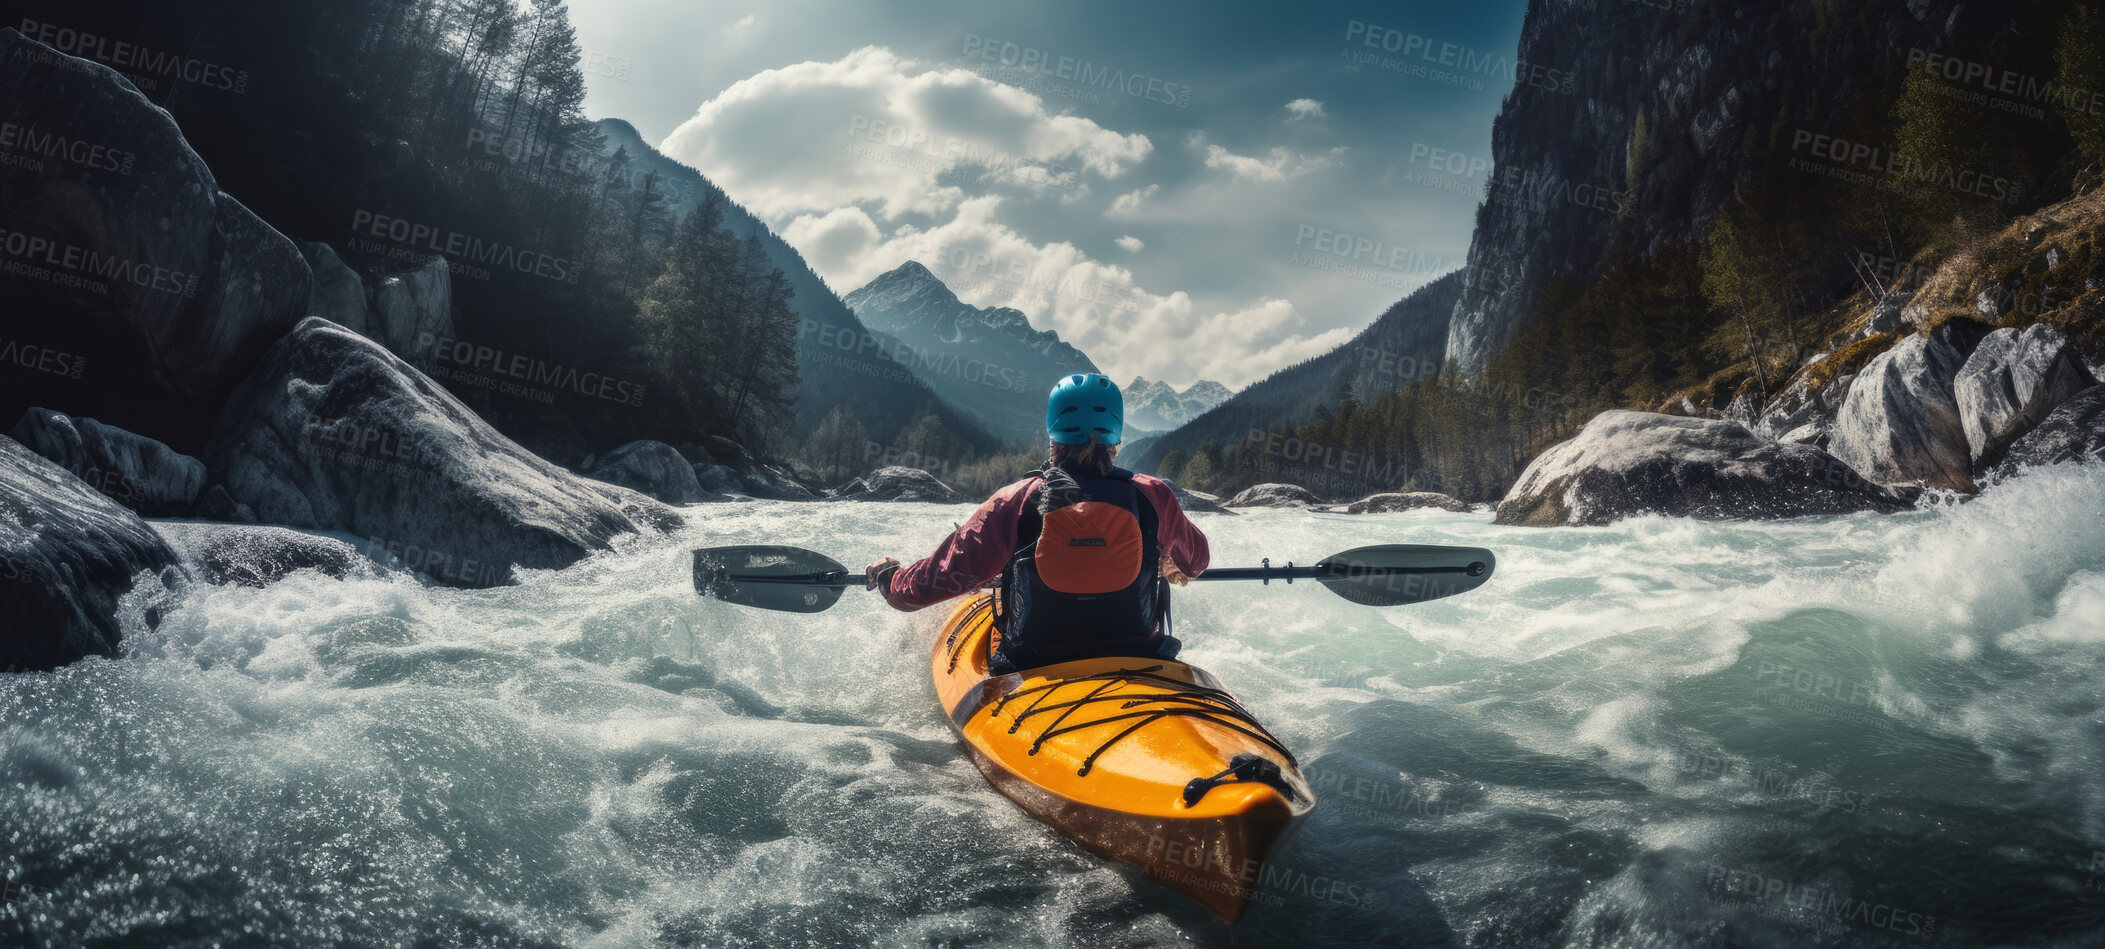 Buy stock photo Kayak rear view of woman. Female kayaking and exploring in a river. Tourist and travel